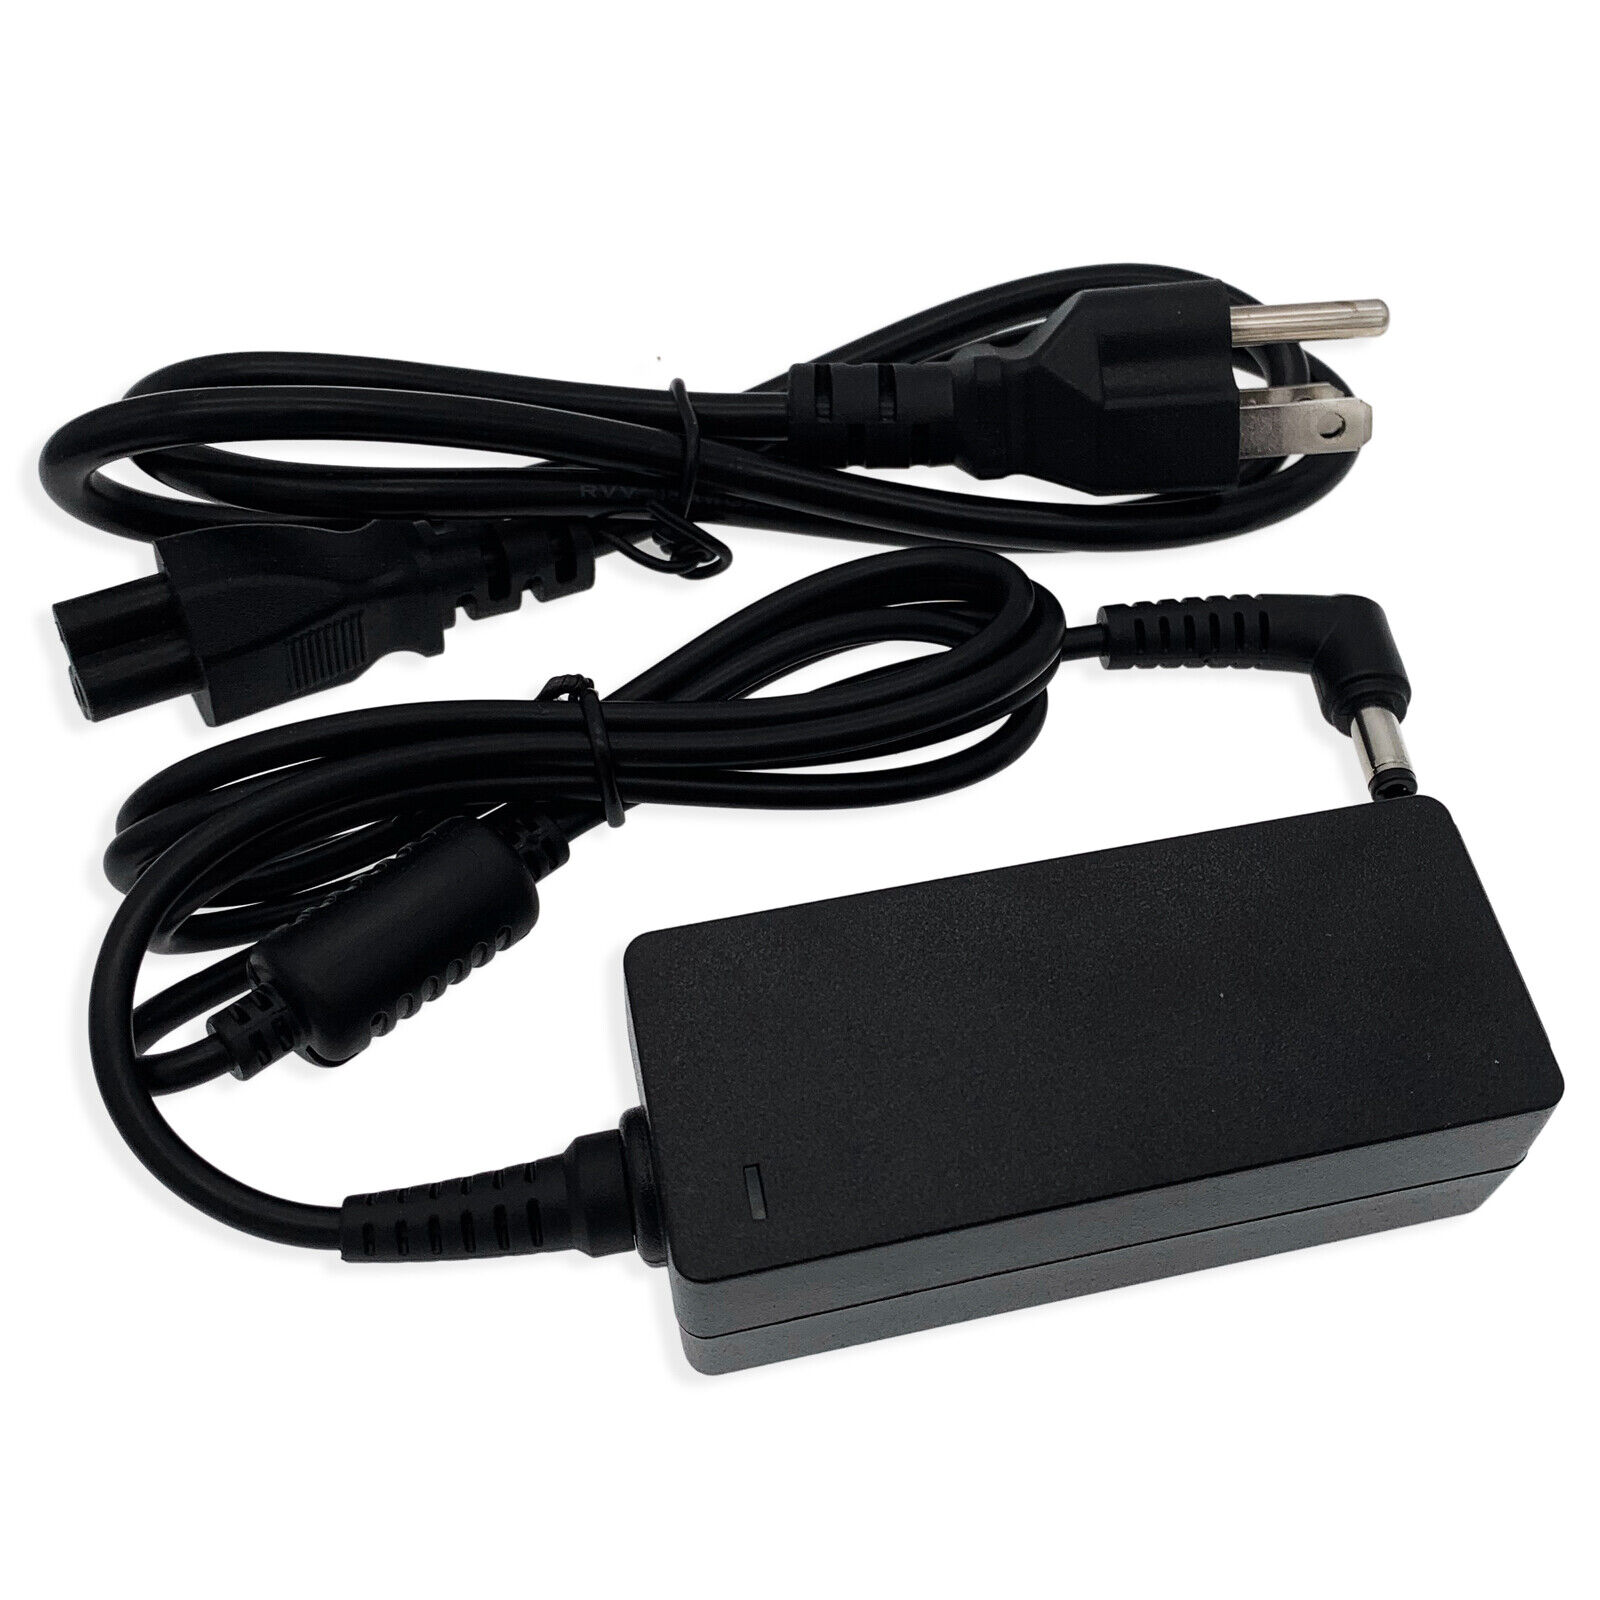 12V 4A Charger Compatible with Snailax, Nekteck, Comfier Back/Foot/Mat Massage, XH1200-4000 Power Supply Replacment UL A